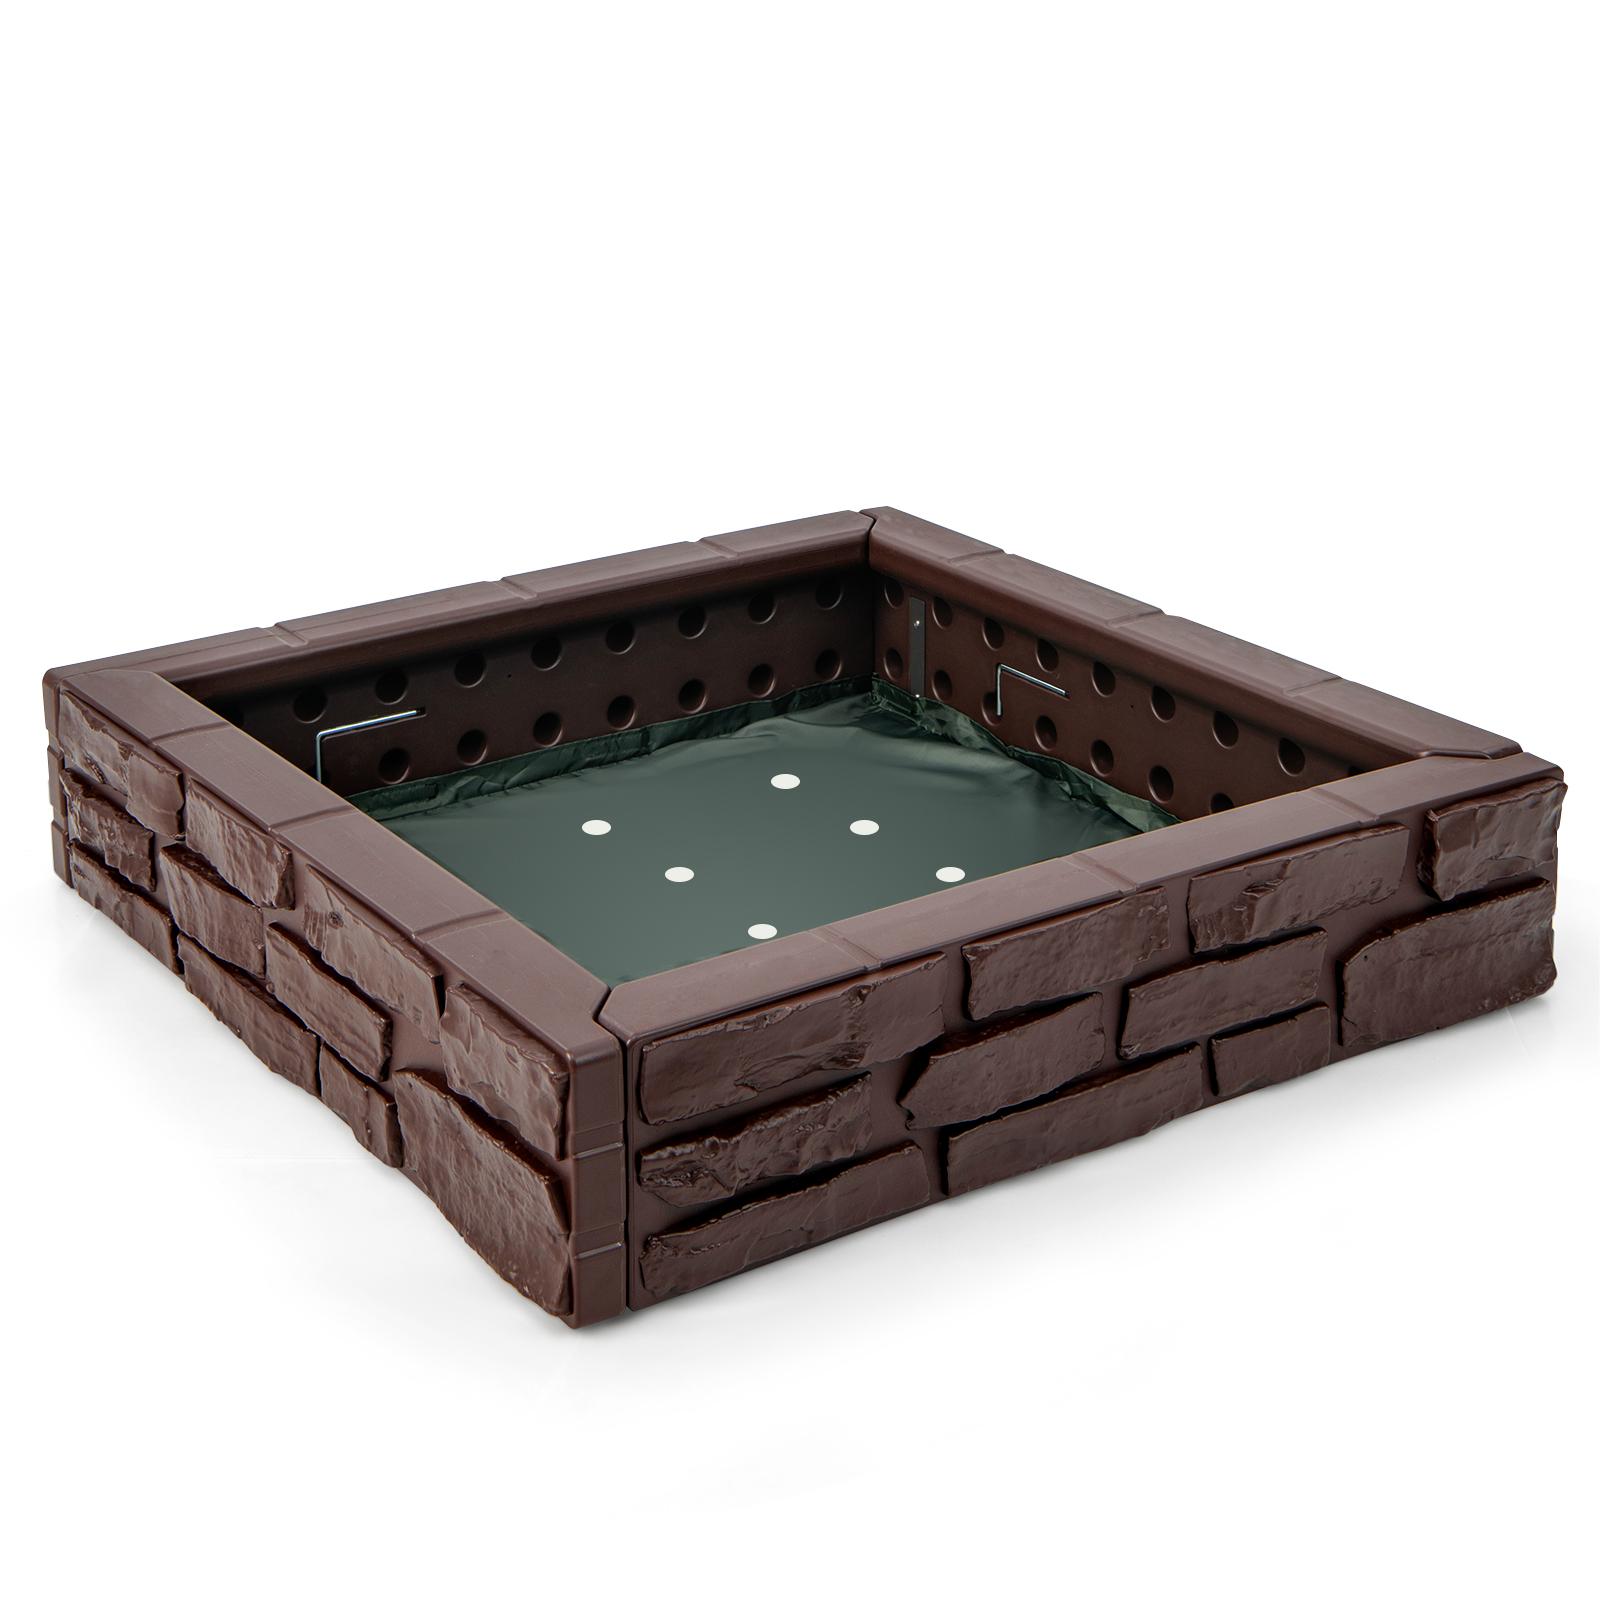 Sandbox with Cover and Bottom Liner for Backyard-Brown